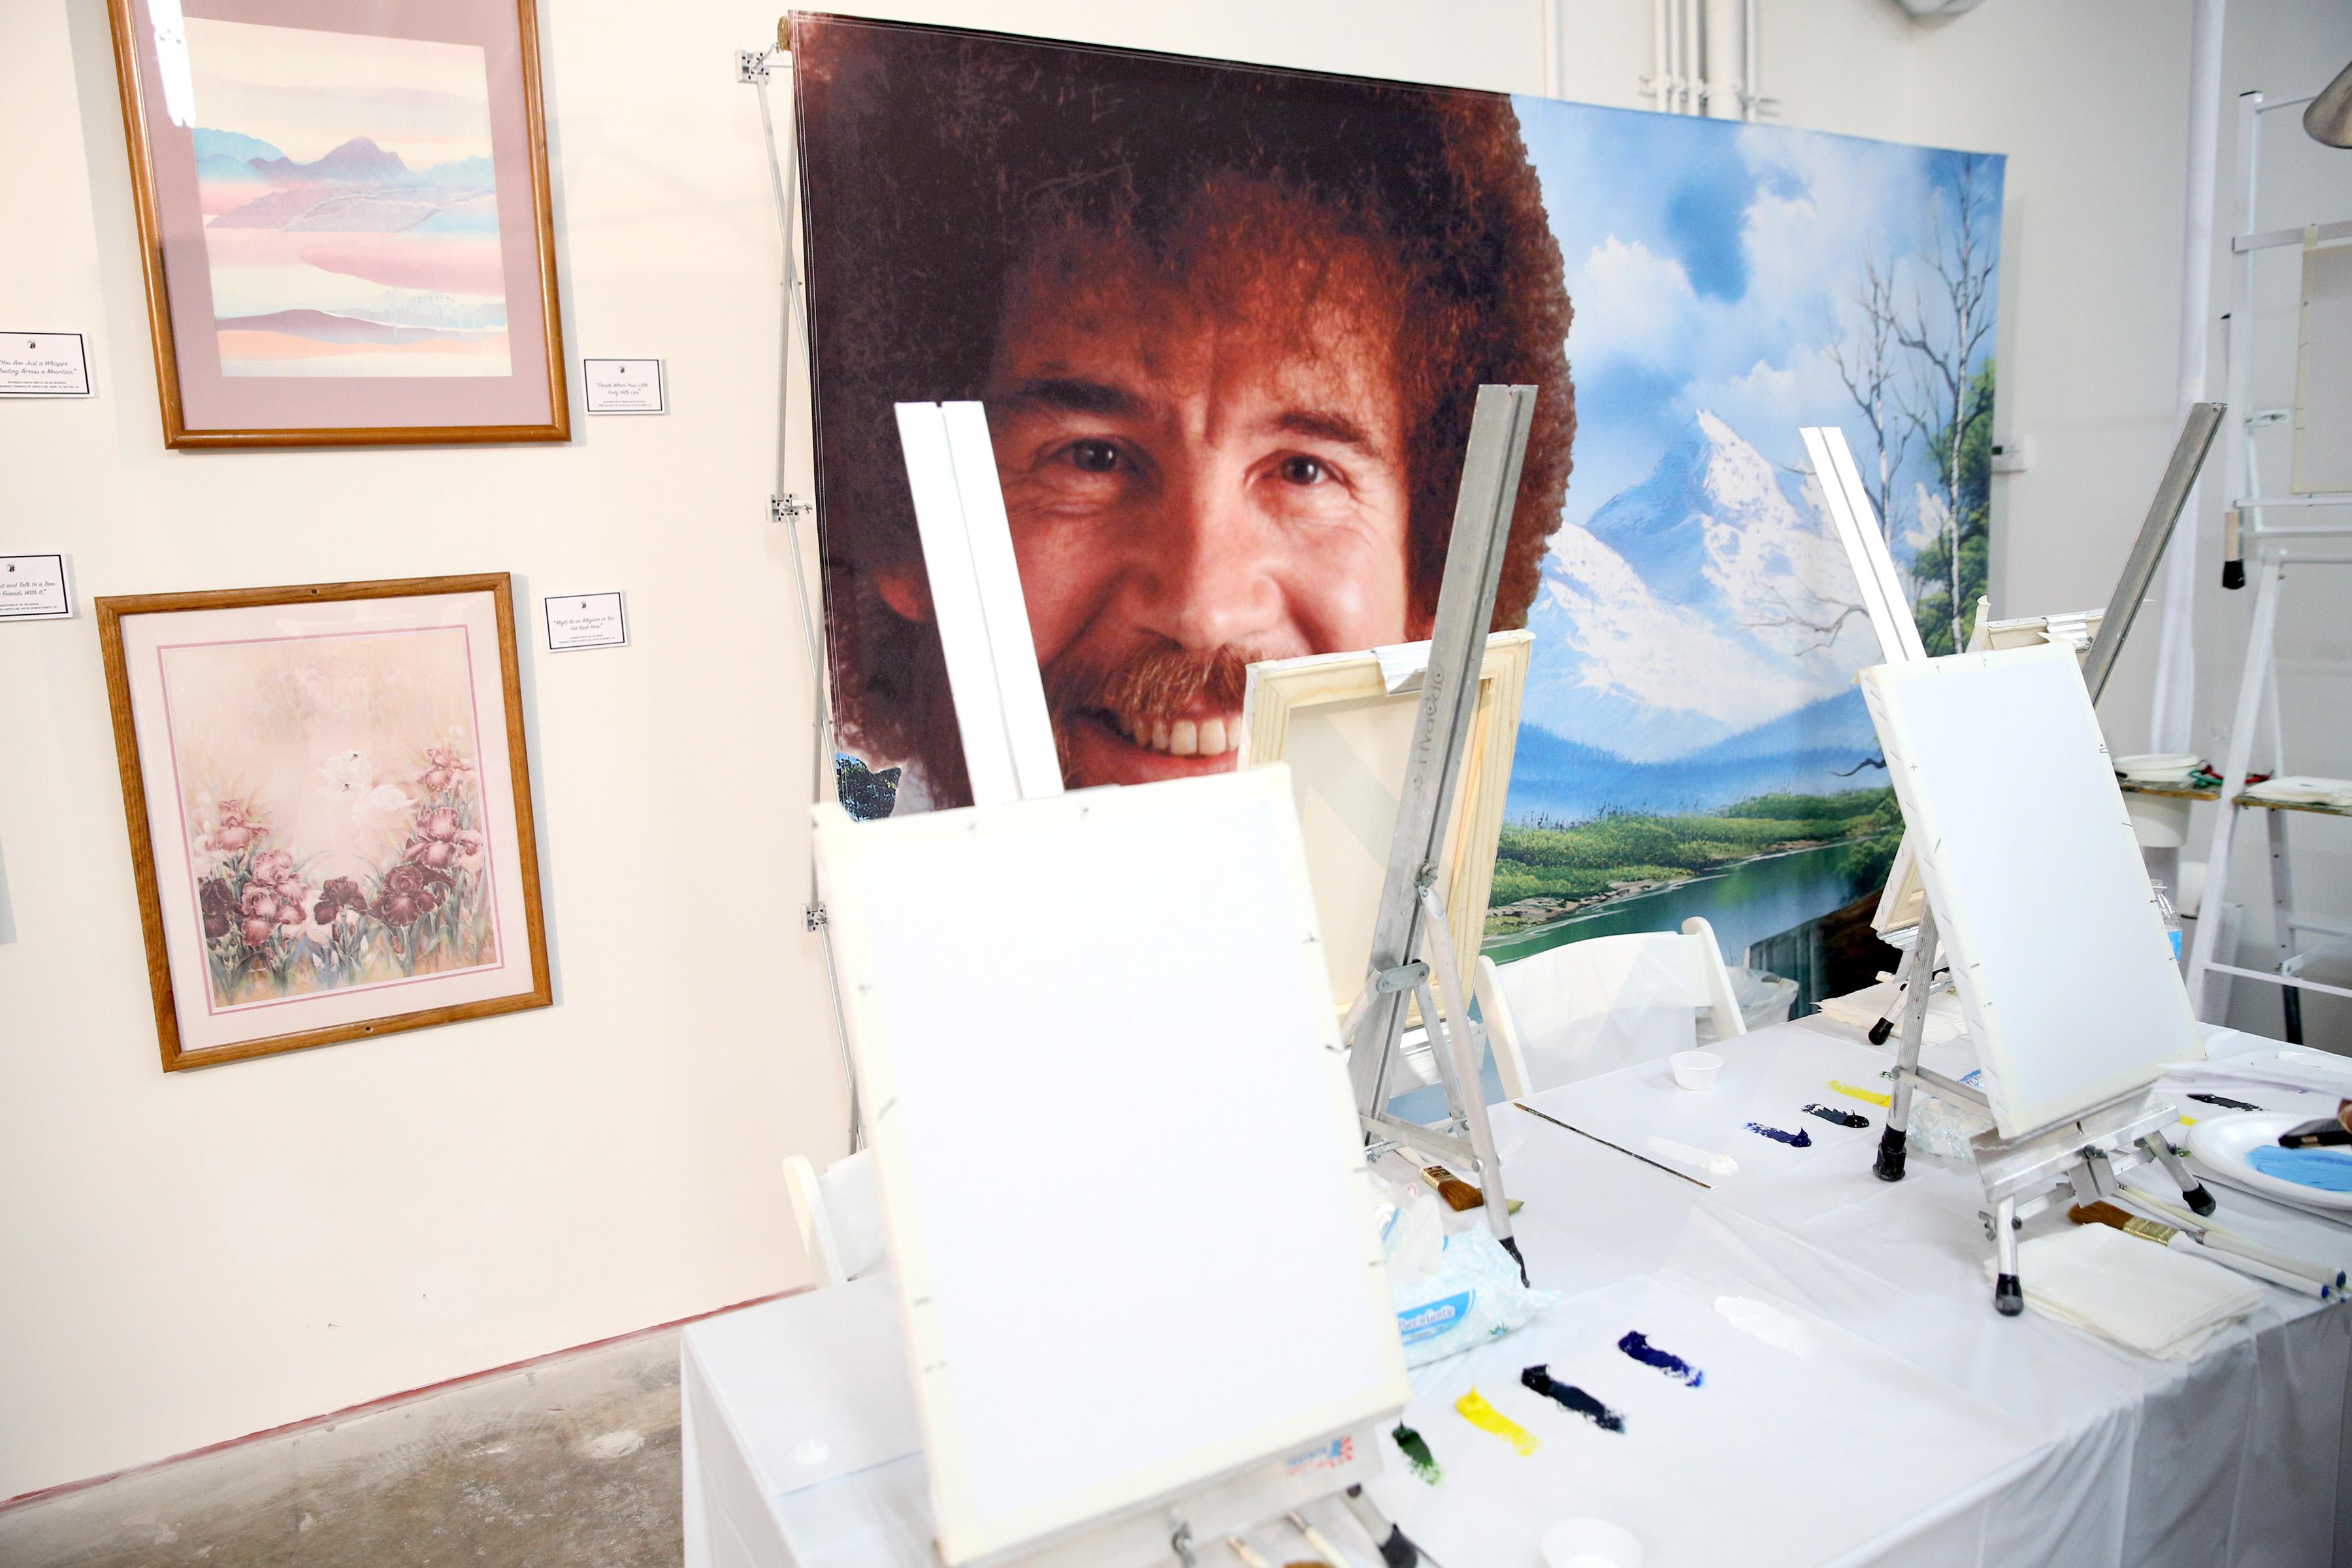 Bob Ross's image behind painting easels